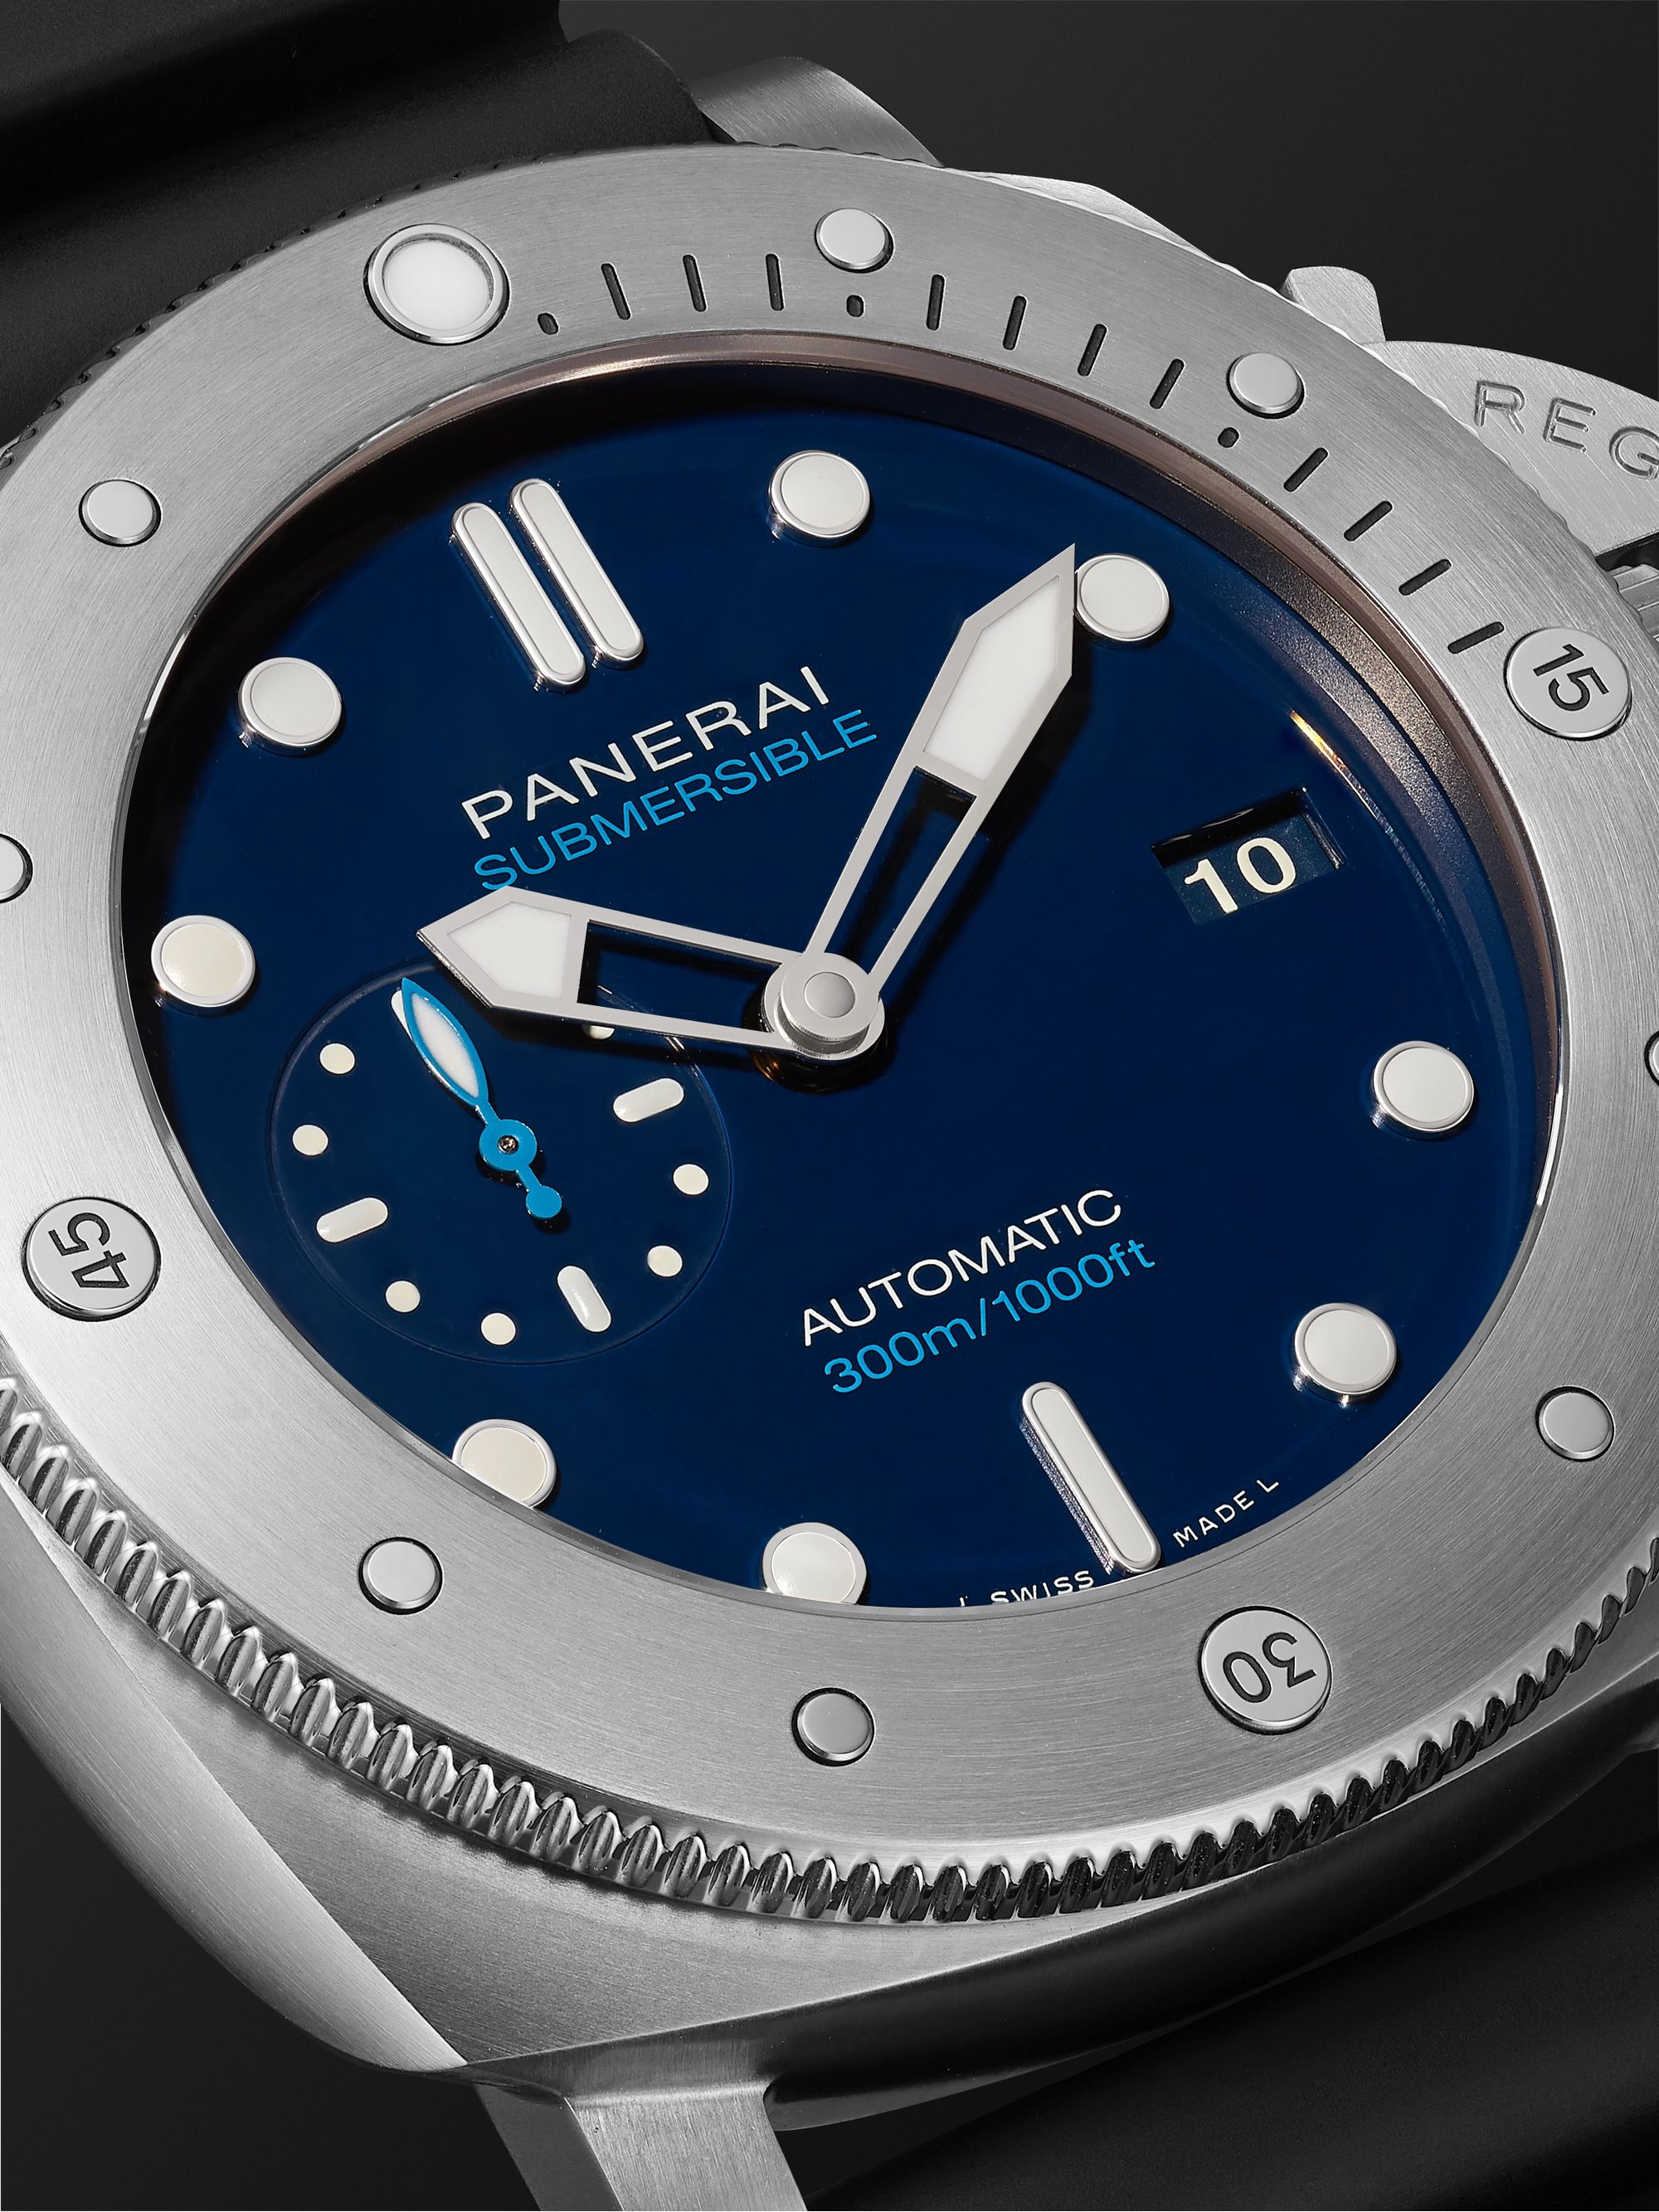 PANERAI Submersible Automatic 47mm BMG-TECH and Rubber Watch, Ref. No. PAM00692